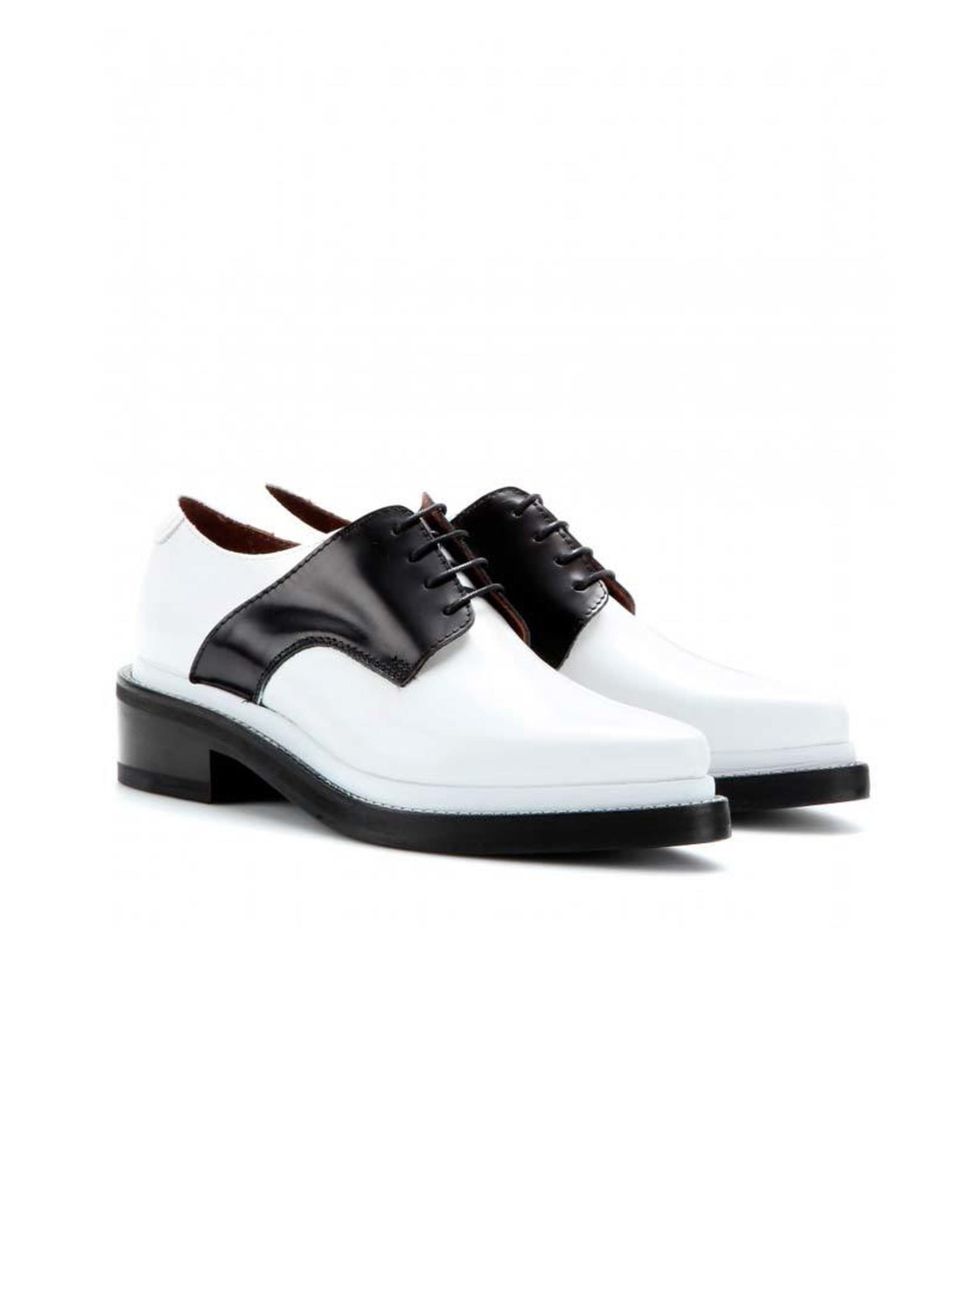 <p>Sharp, slick and graphic monochrome. </p><p>Black and White leather shoes £420 by Acne Studios from <a href="http://www.mytheresa.com/en-gb/lark-leather-oxfords-288678.html">Mytheresa</a></p>